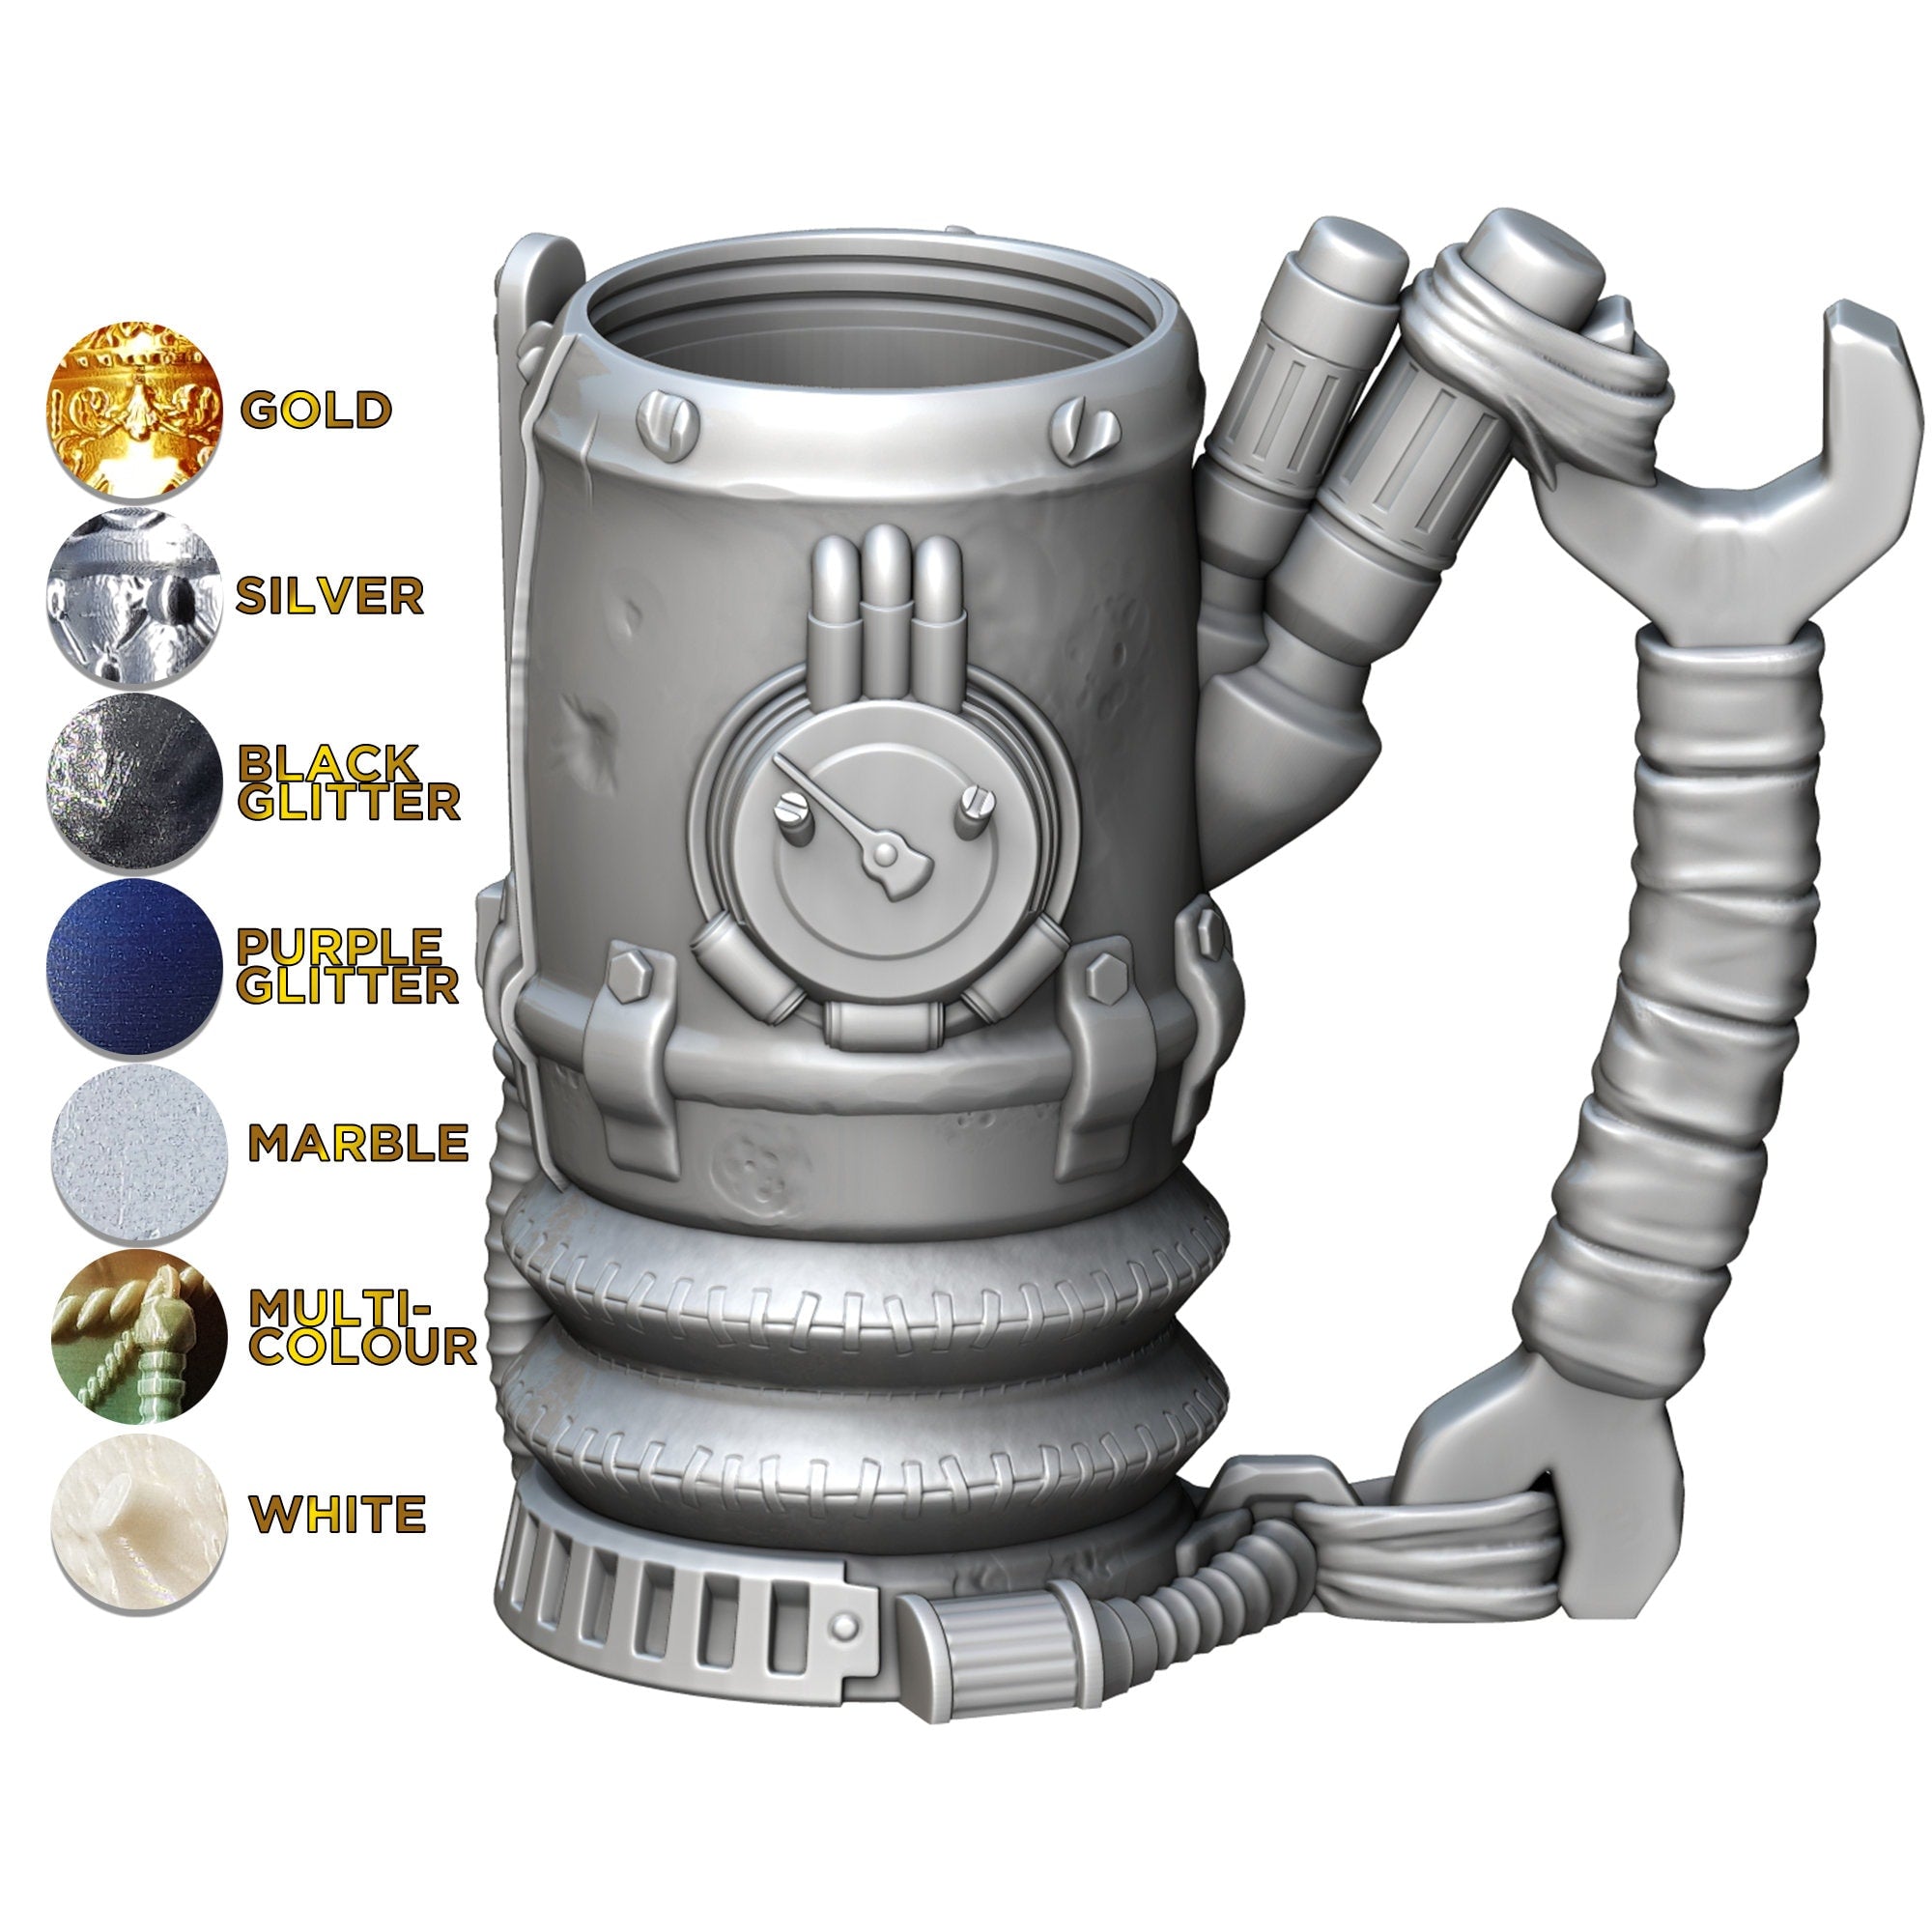 The GADGETEER | Mythic Mug | Larp | Gaming Zubehör | Tabletop | Dice Cup | Box | Holder | Dungeons and Dragons | DnD | RPG | Fantasy-Role Playing Games